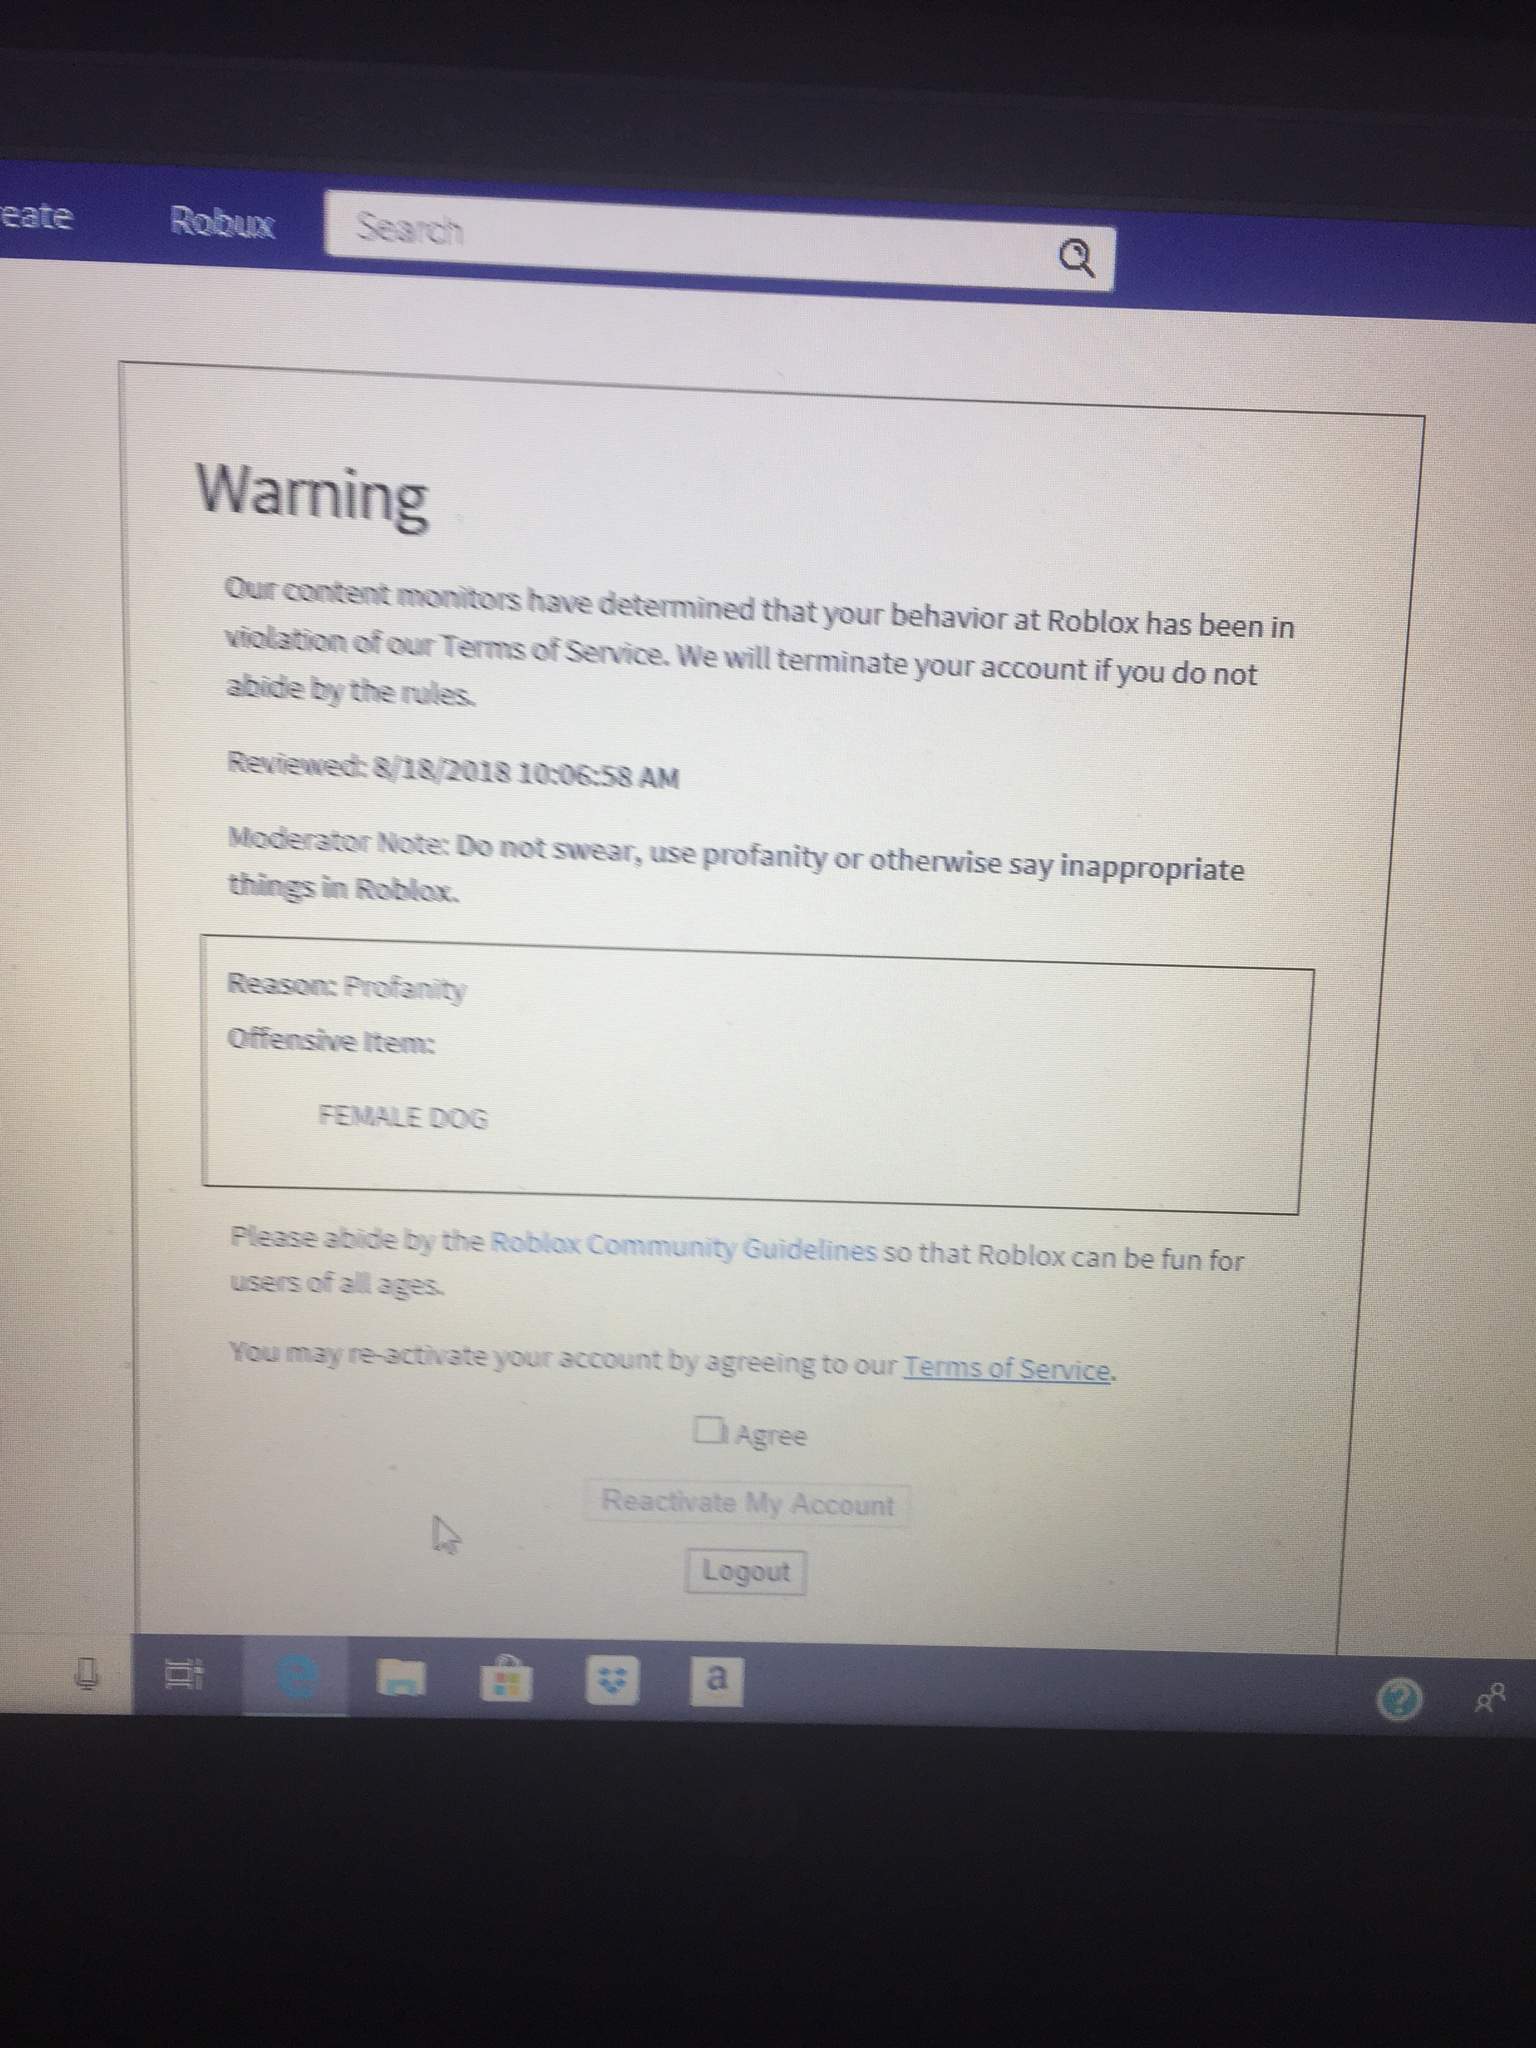 2nd Warning For Talking About Male And Female Dogs Roblox